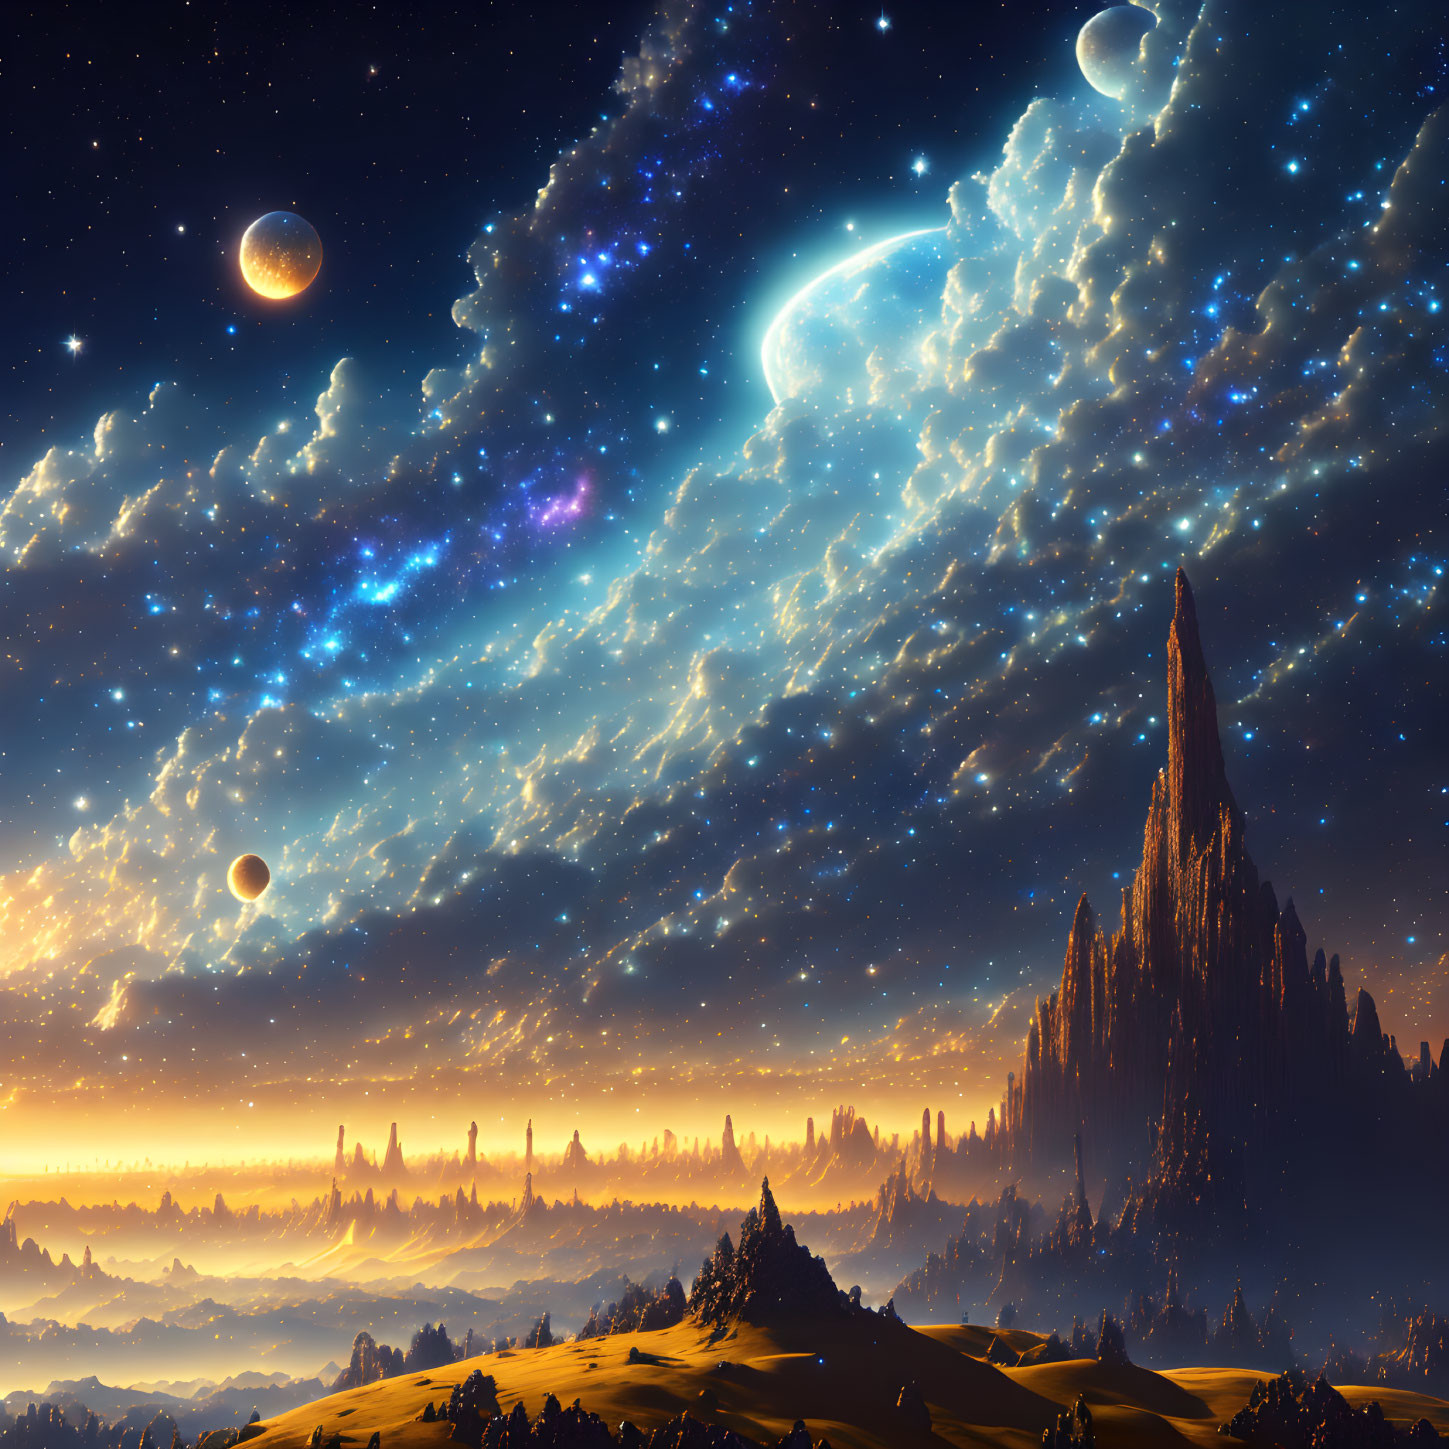 Fantastical dusk landscape with multiple moons and celestial body above forest and rock formation